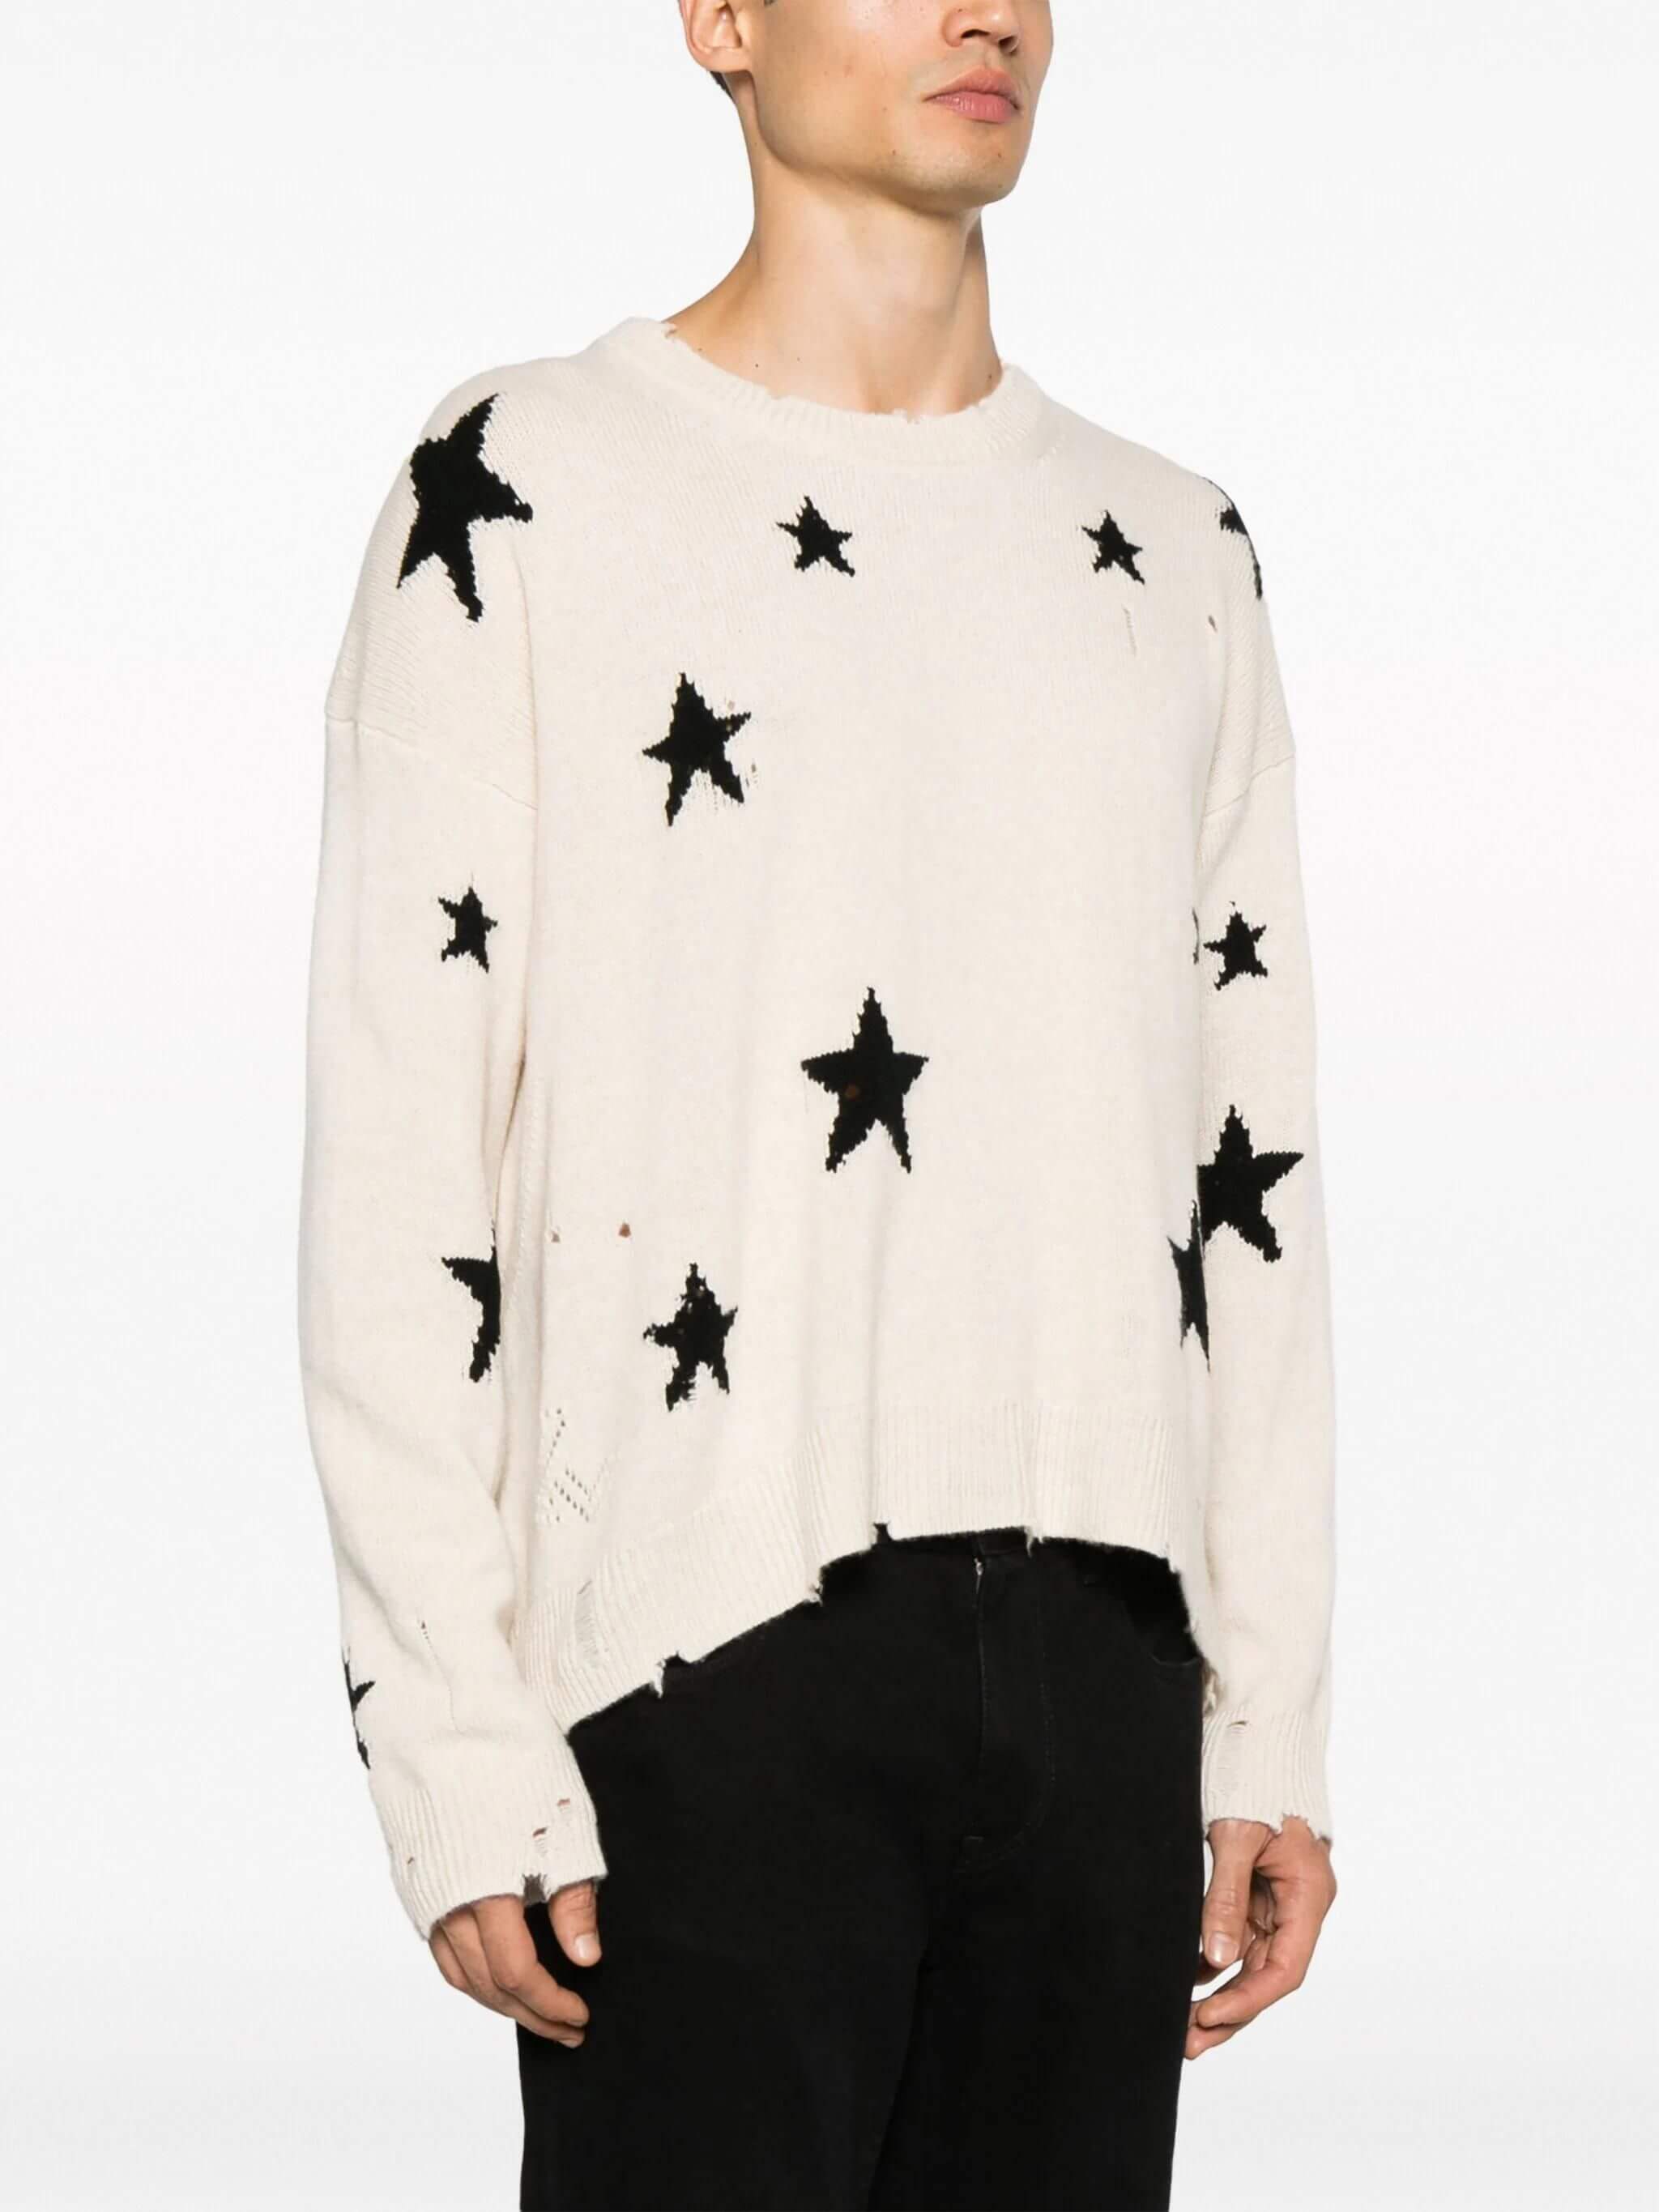 Holed Cashmere Sweater  Women's Men’s unisex anywear Top Star Pattern Holes 100%-Cashmere Loose Sweaters for Man Woman Fall Autumn Winter Spring womens mens Fashion season  in white with black stars